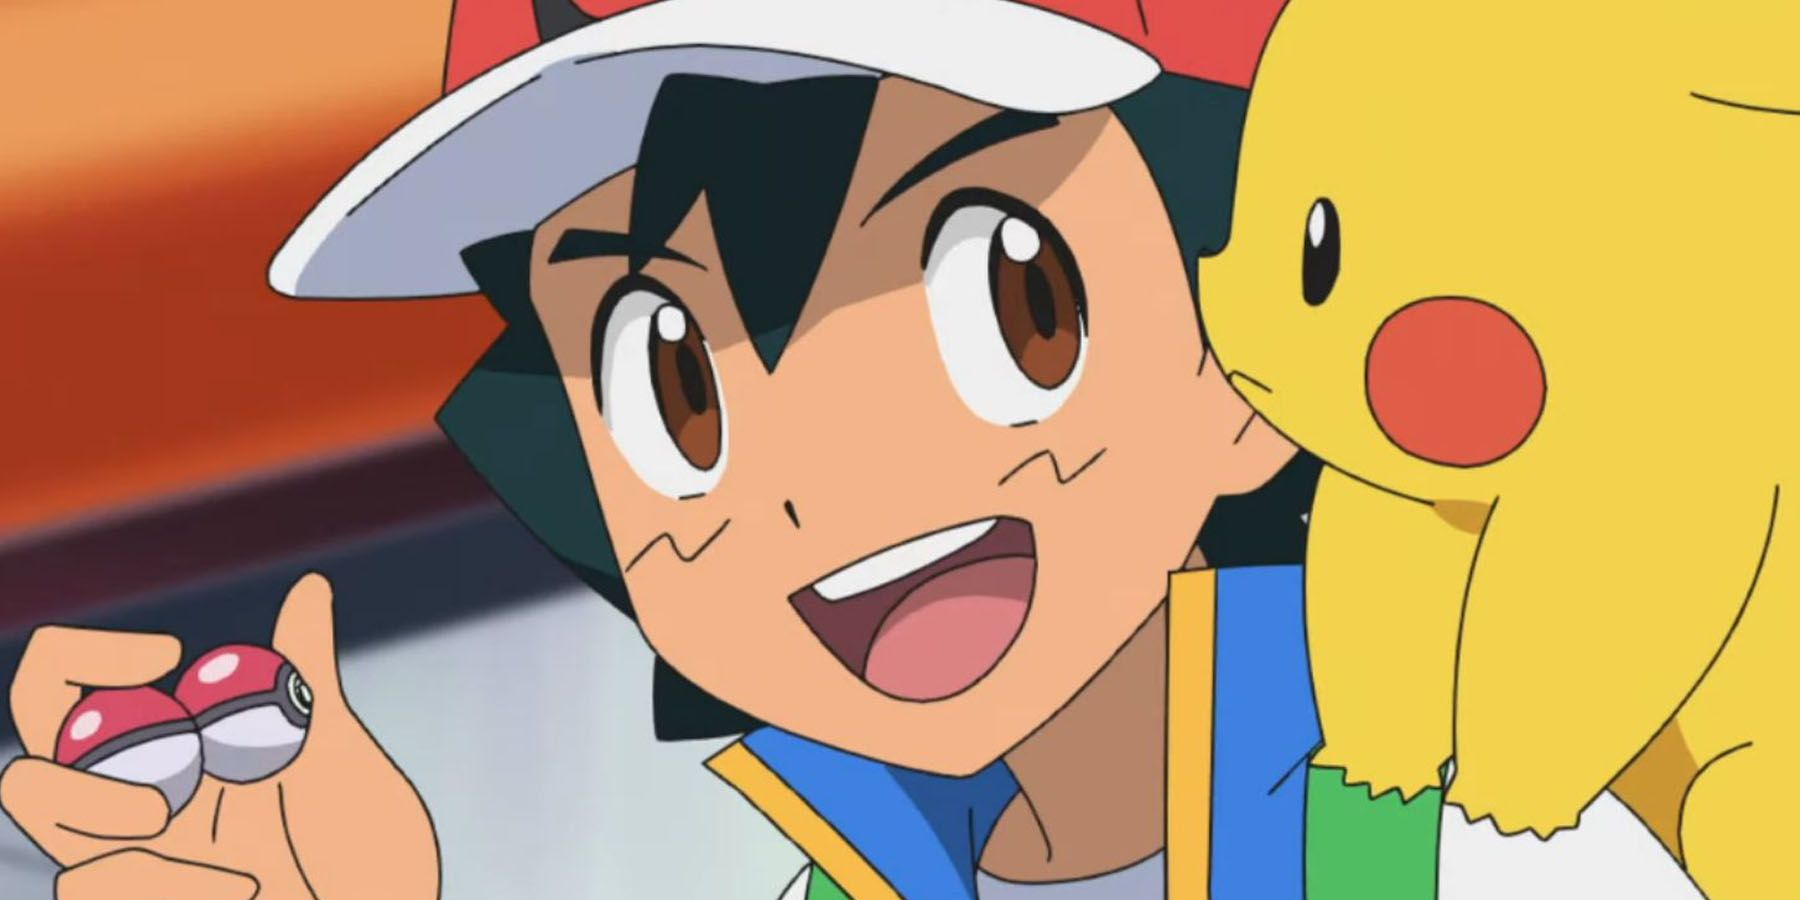 A screenshot of Ash holding two Pokeballs with Pikachu by his side in the Pokemon anime.